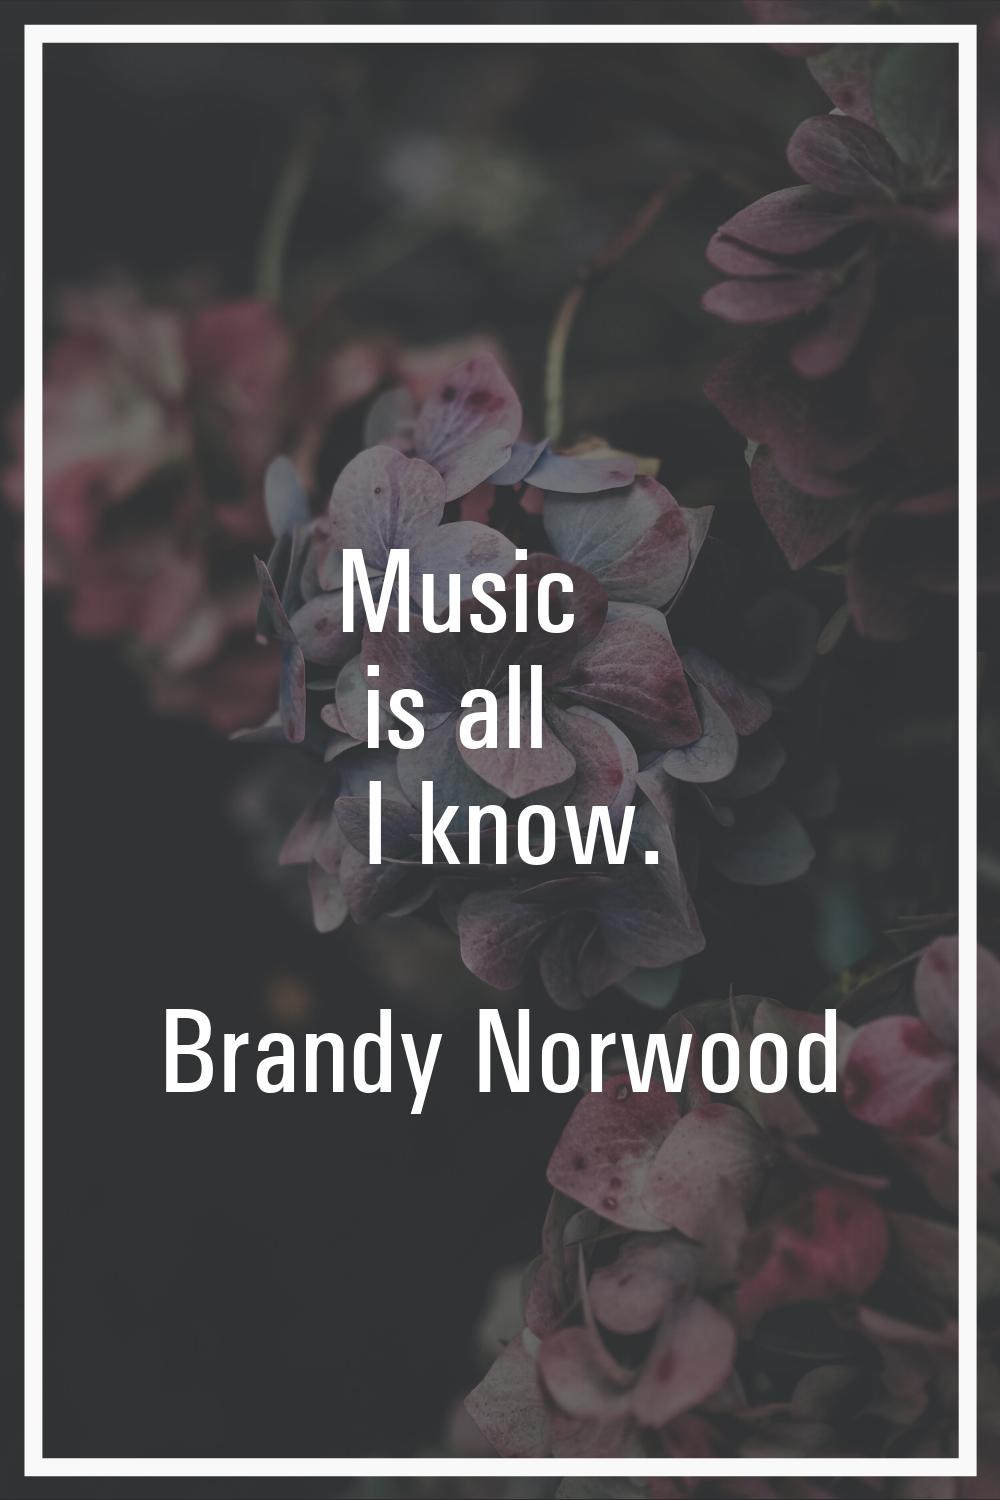 Music is all I know.